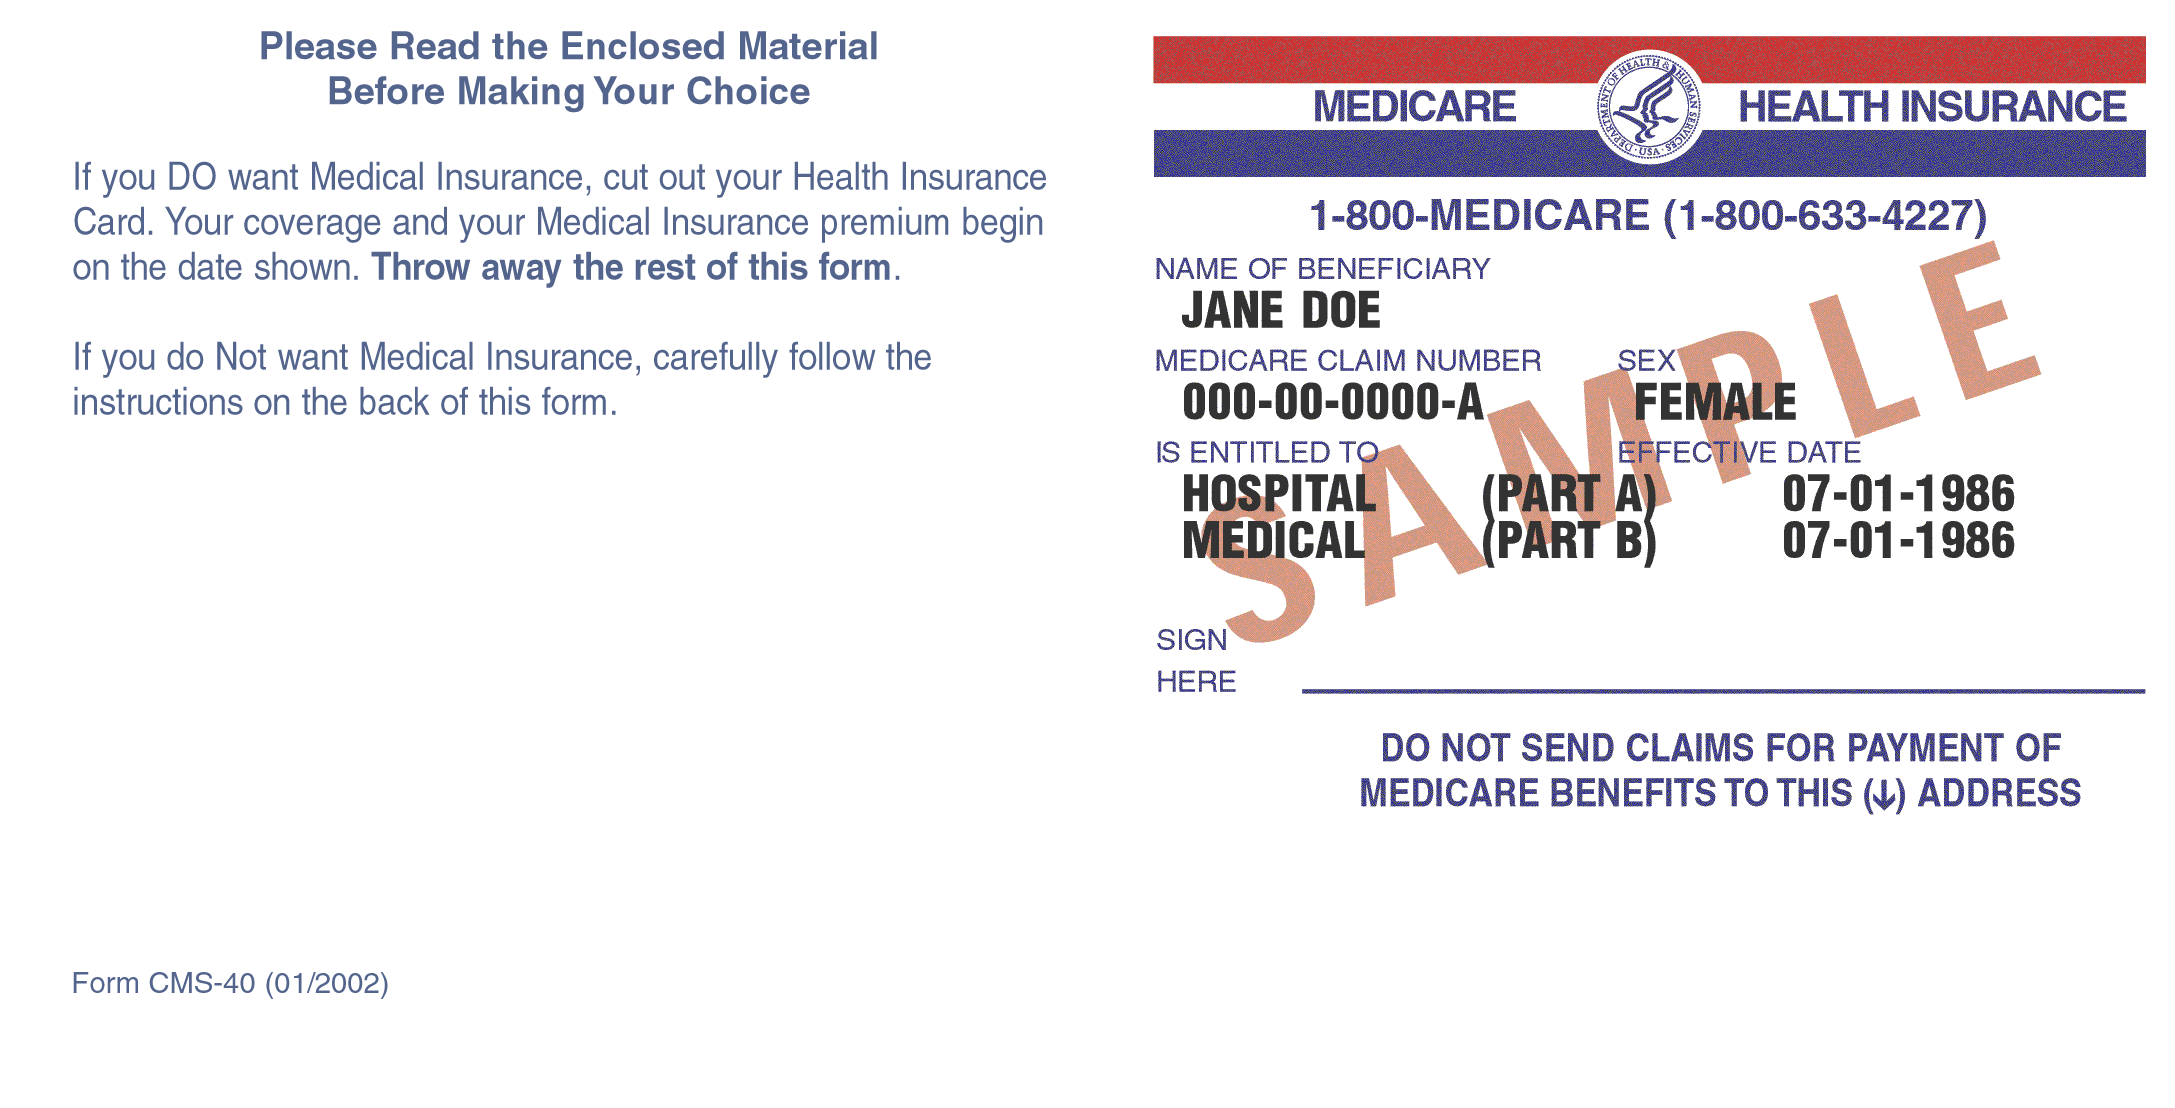 What is the Medicare Program and what it covers for me as a beneficiary